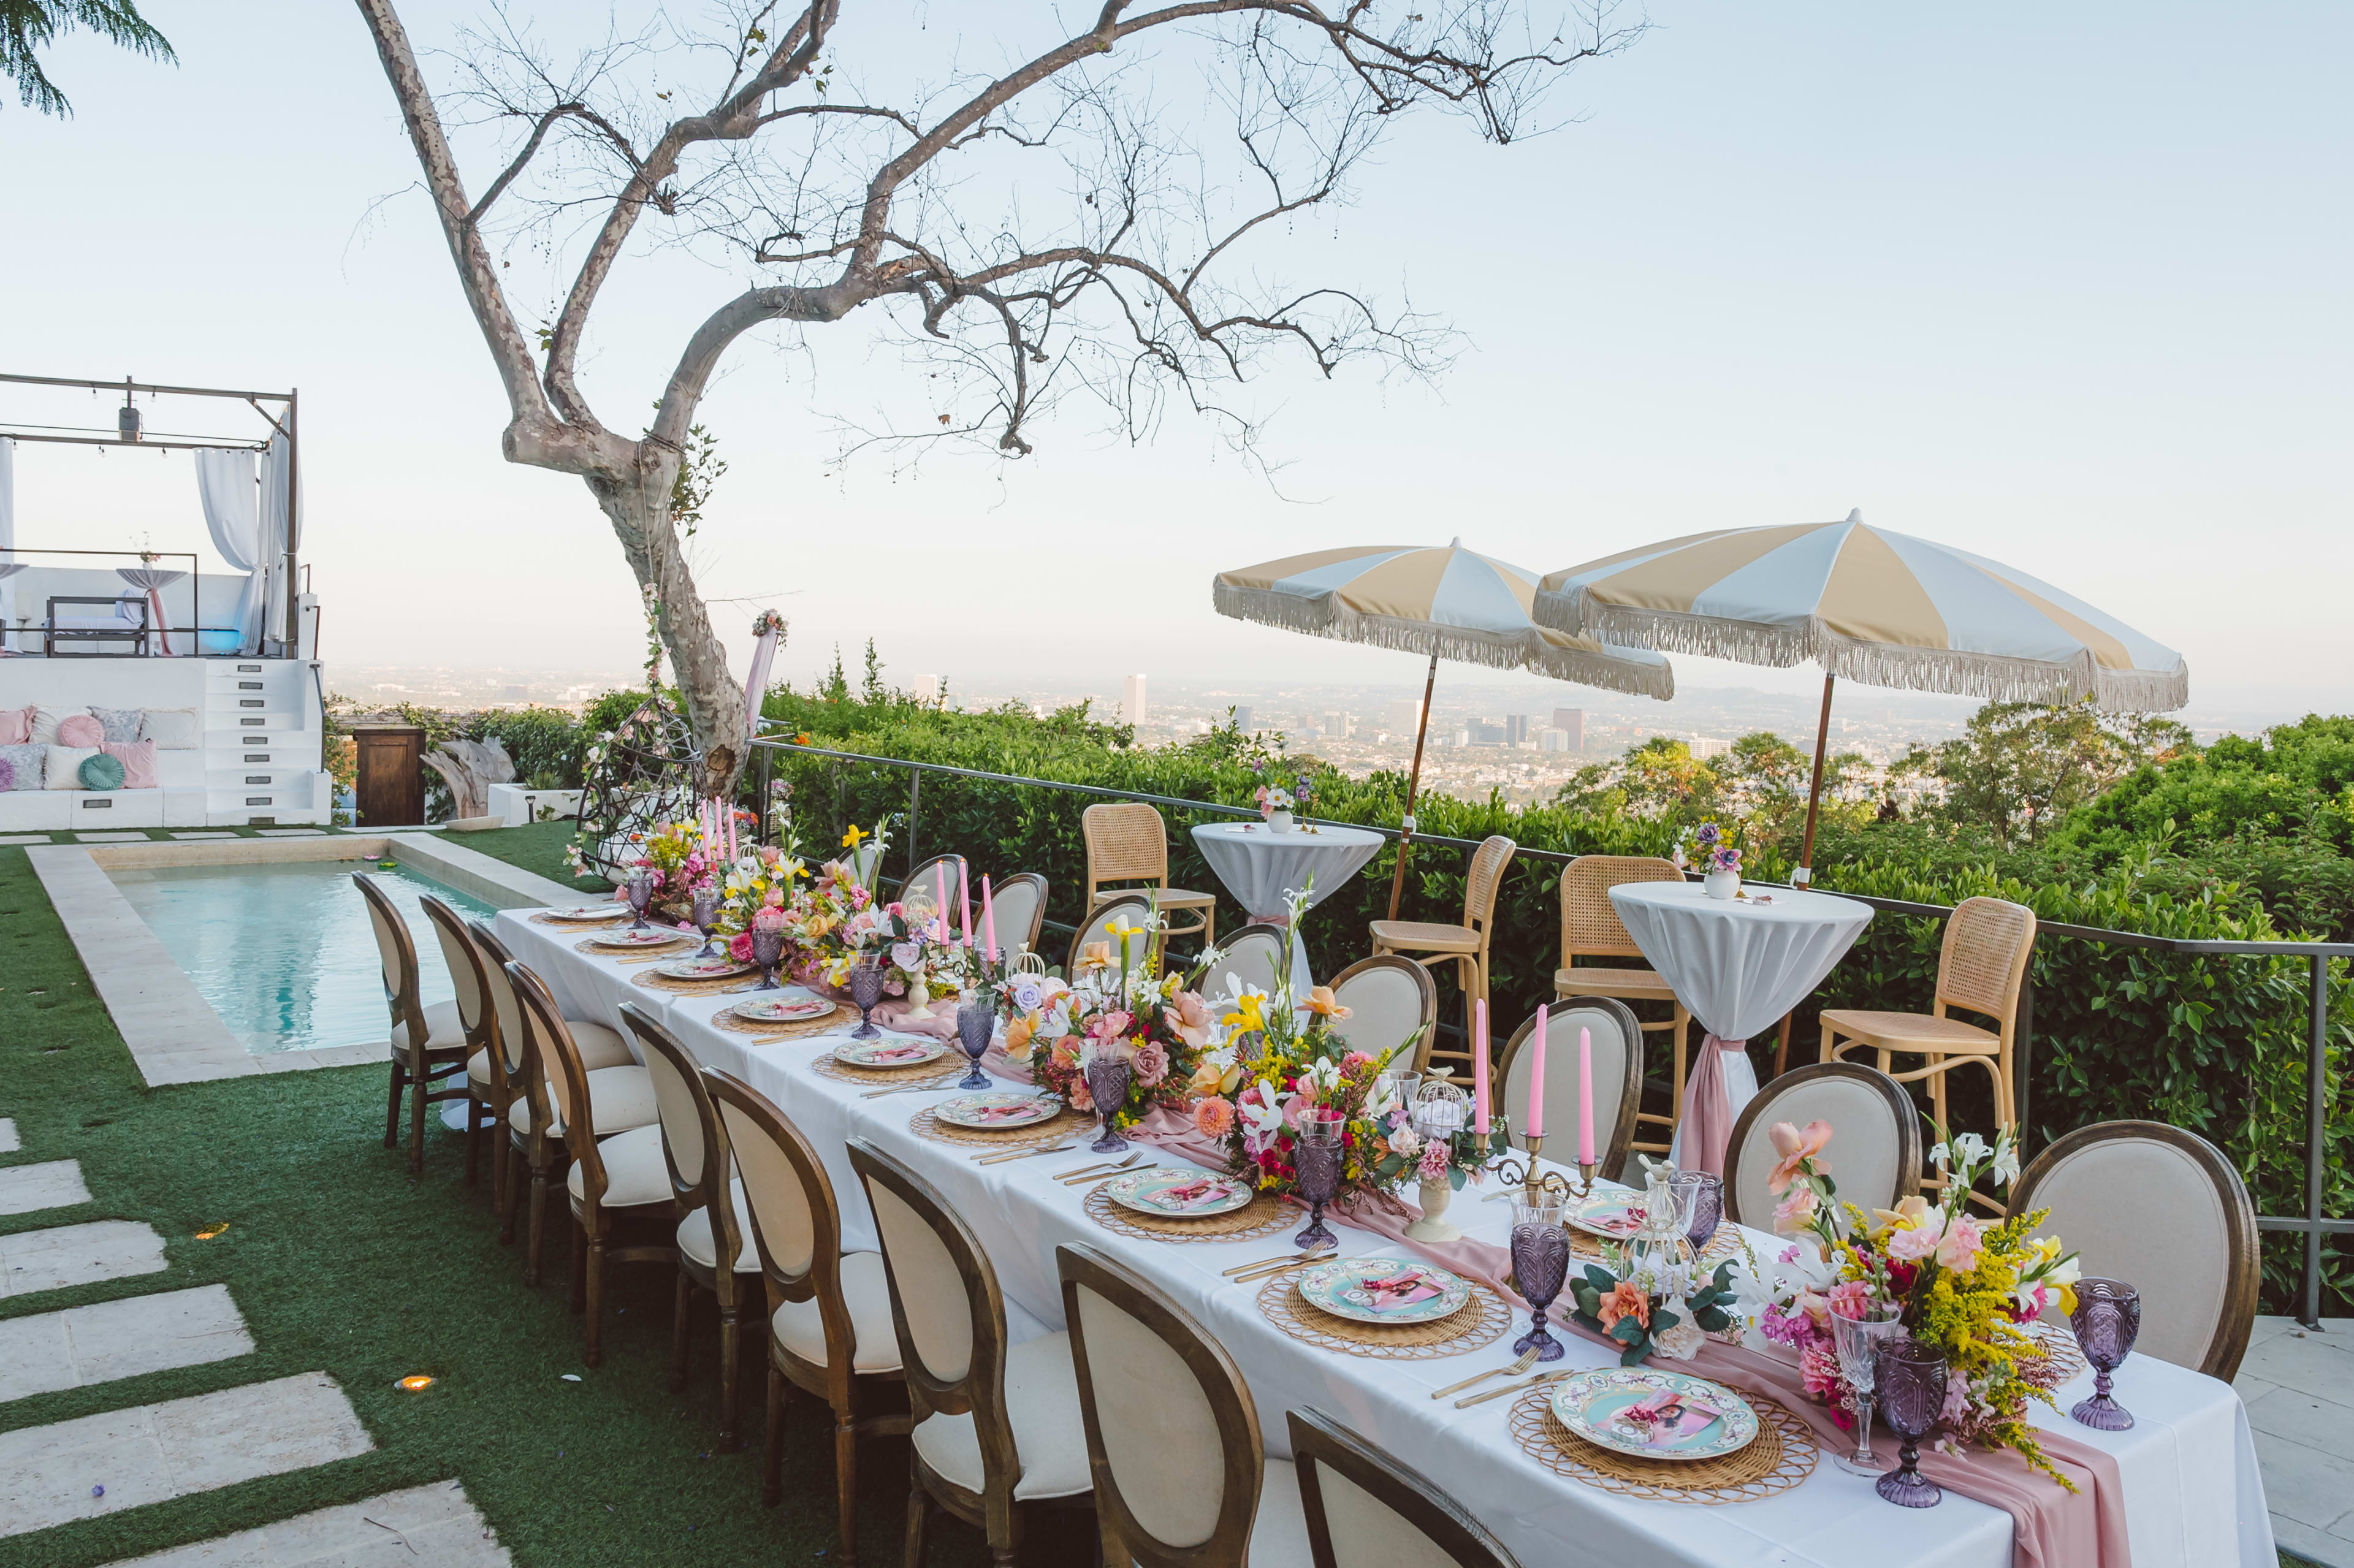 A long table set up for an outdoor party by the pool and overlooking a city view.